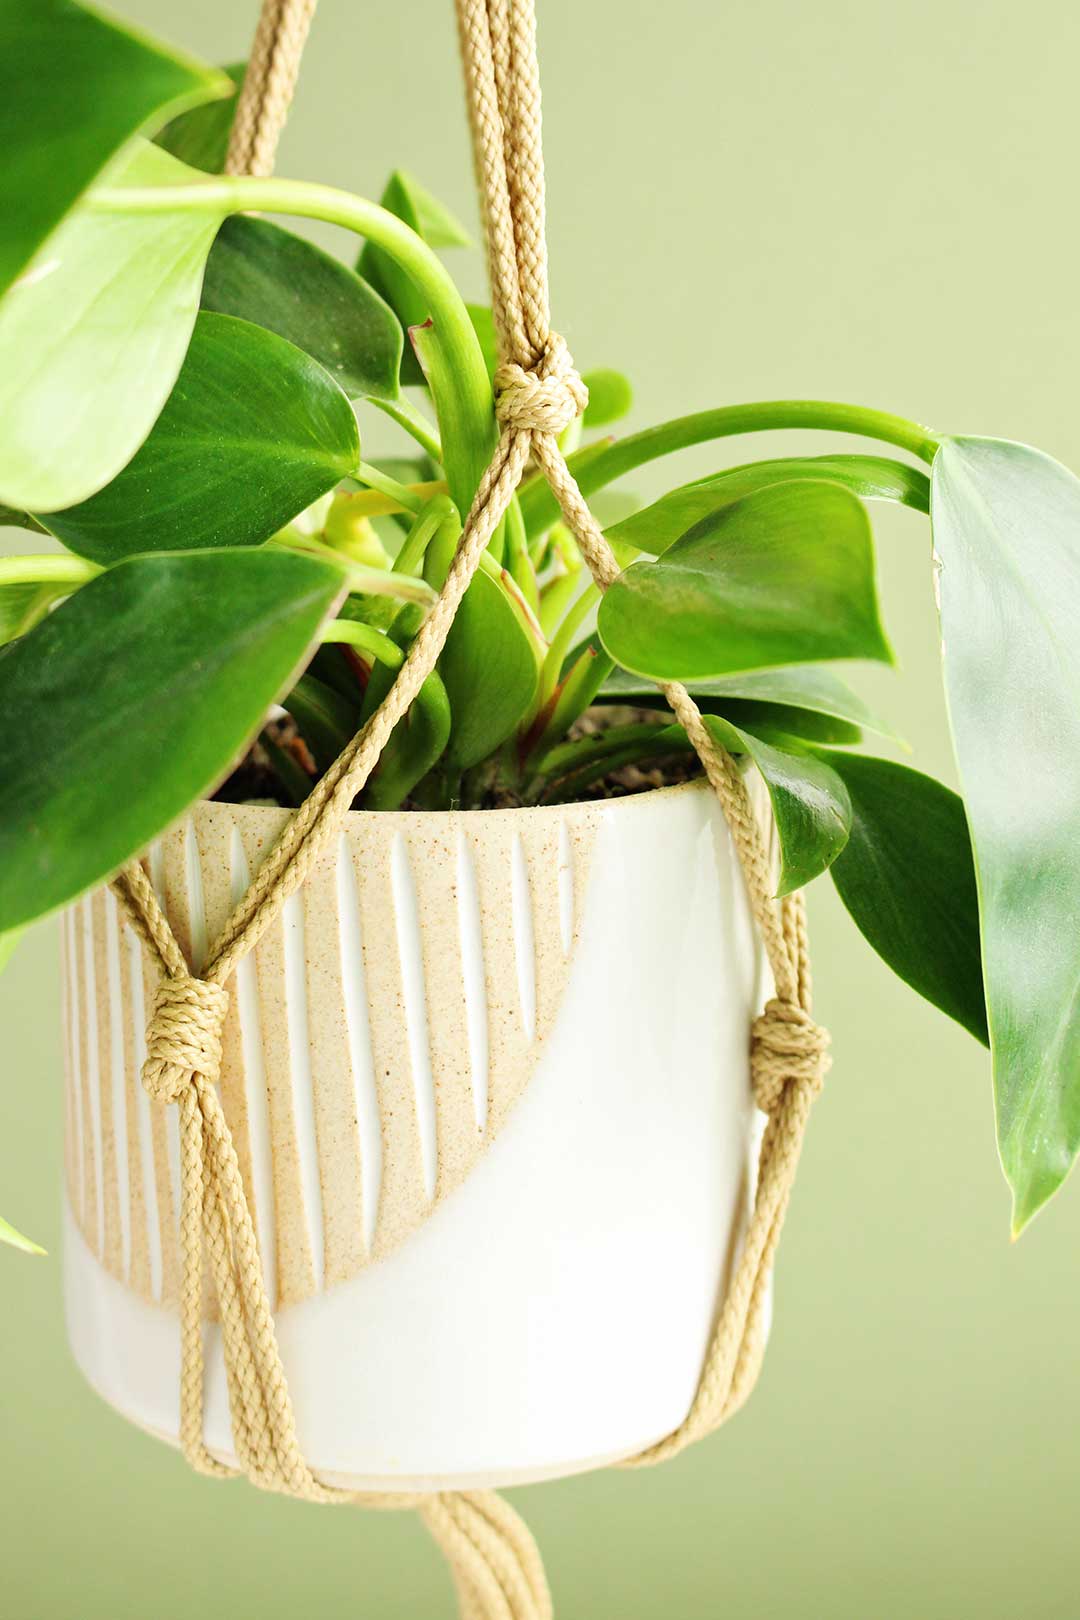 Close up view of macrame plant hanger holding a white and sand pot with leafy plant inside.